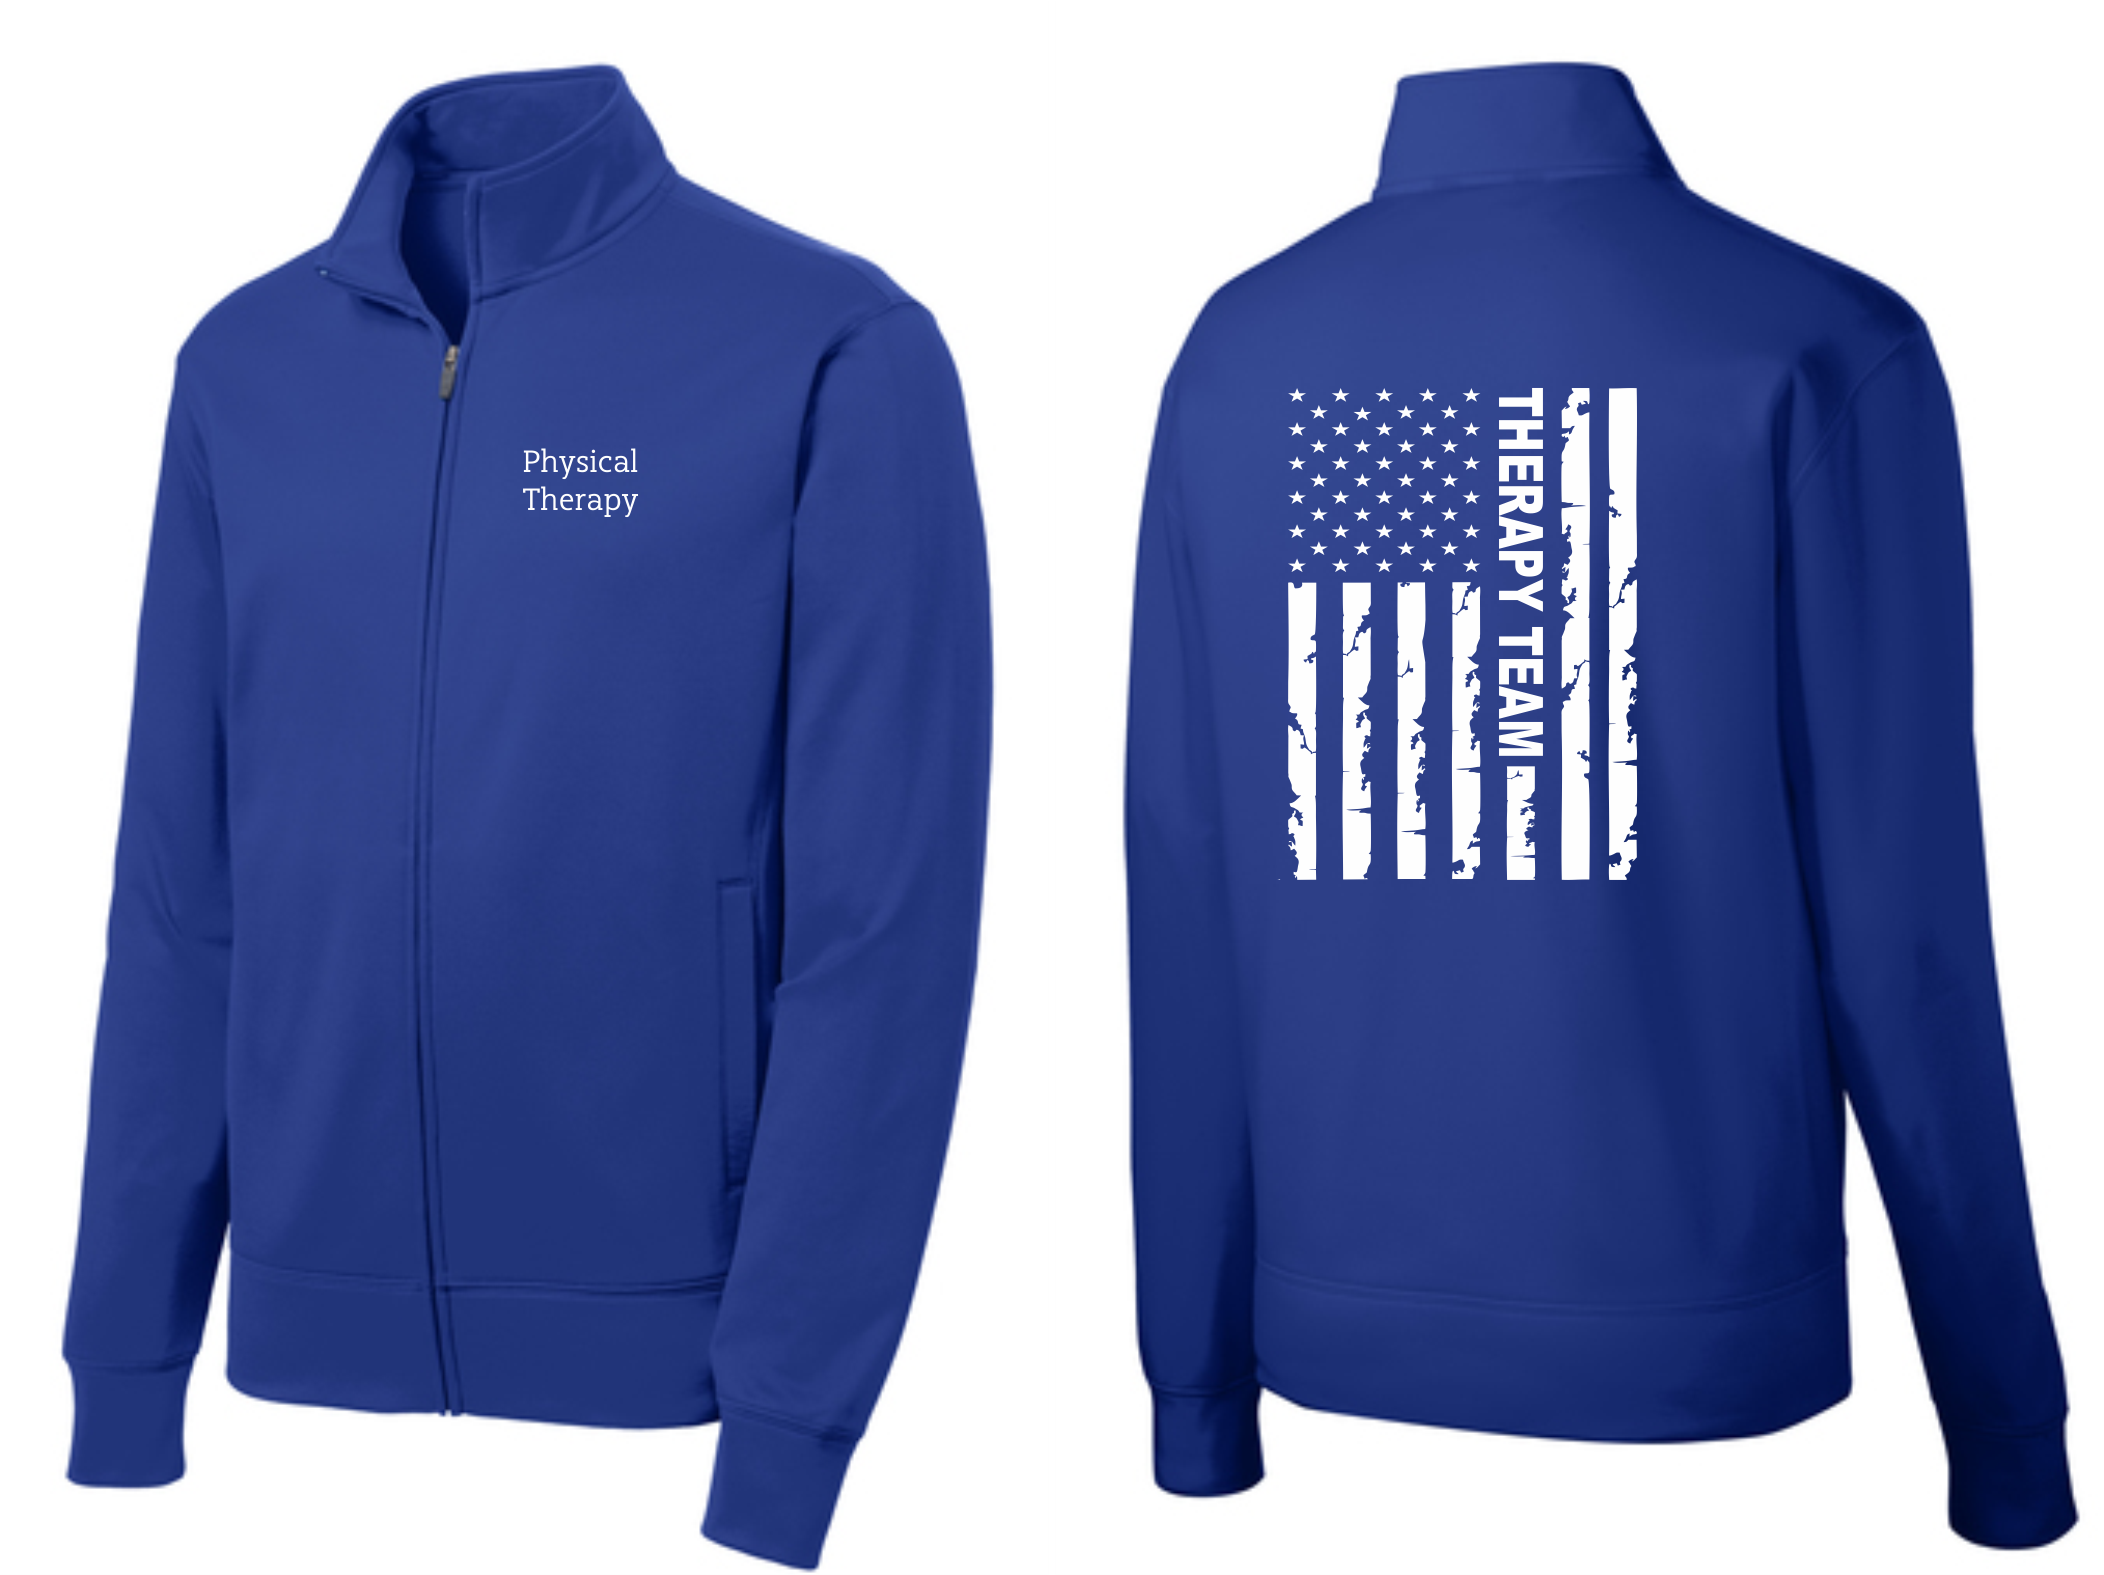 PHW - Physical Therapy Flag - Mens 1/2 or Full Zip Jacket